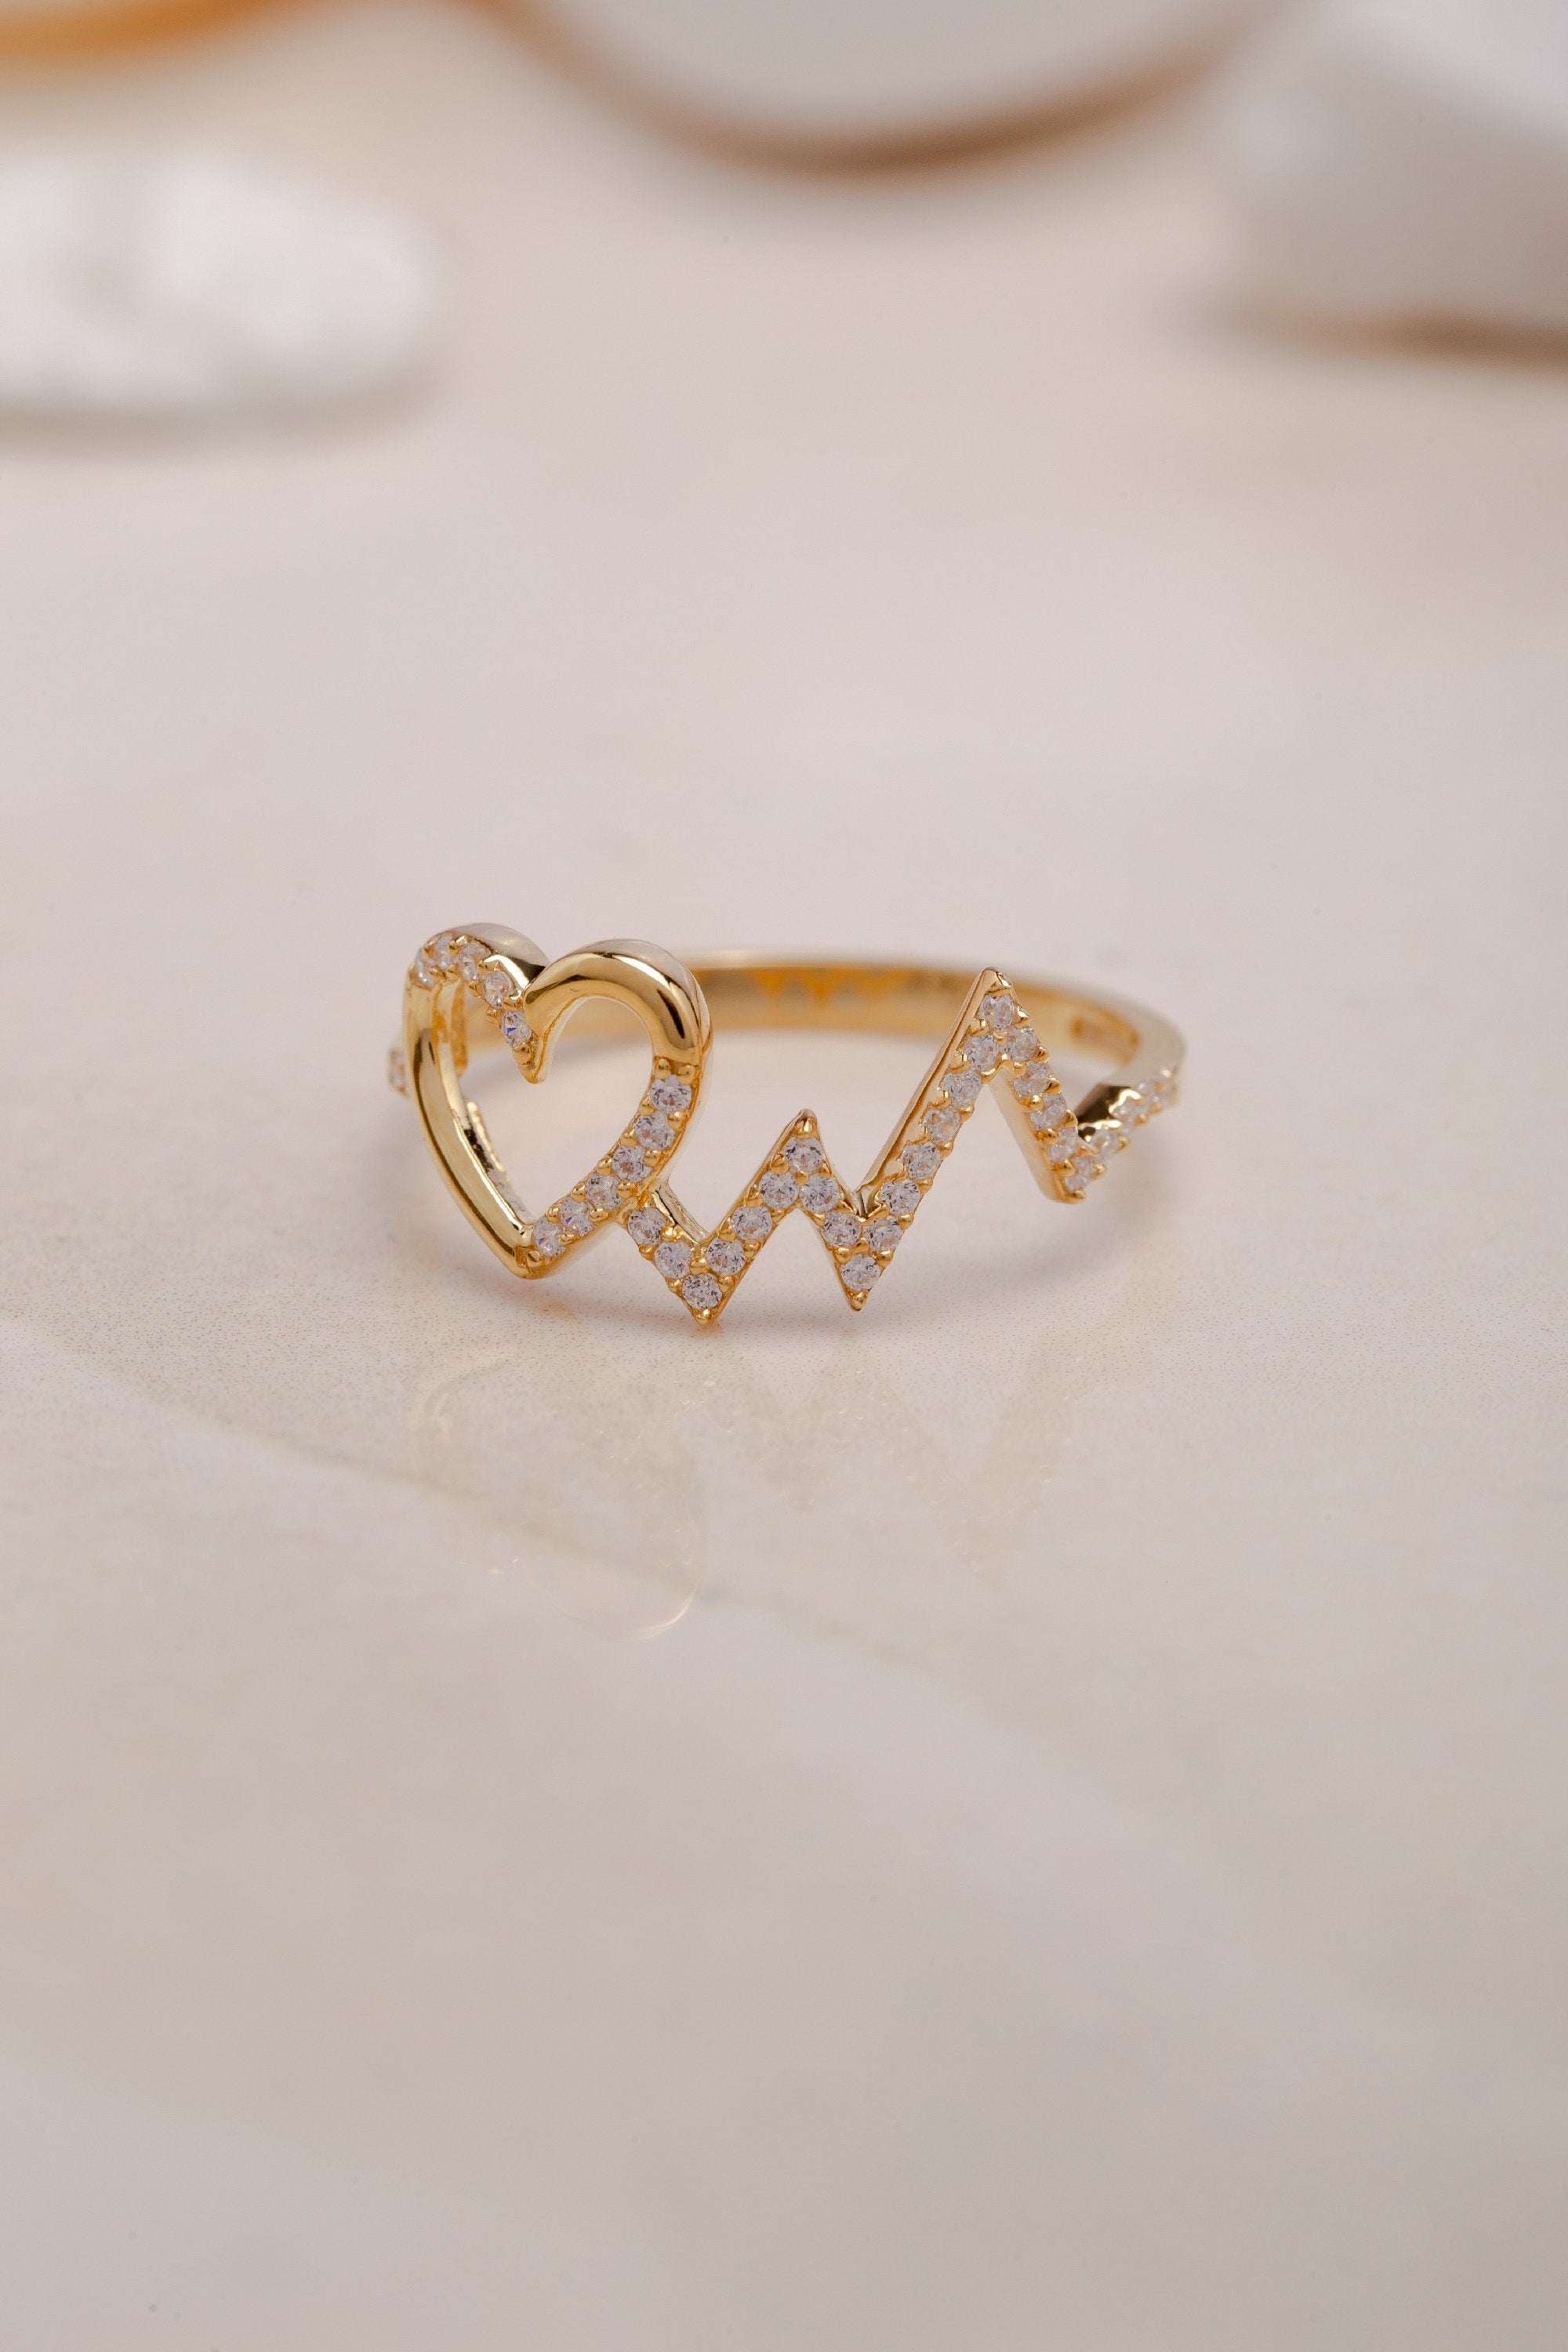 14KHeart Rhythm Ring, Sterling Silver Pulse Ring, Symbolic Heartbeat Jewelry, Unique Gift for Her, Medical Heartbeat Ring, Love Ring for Her